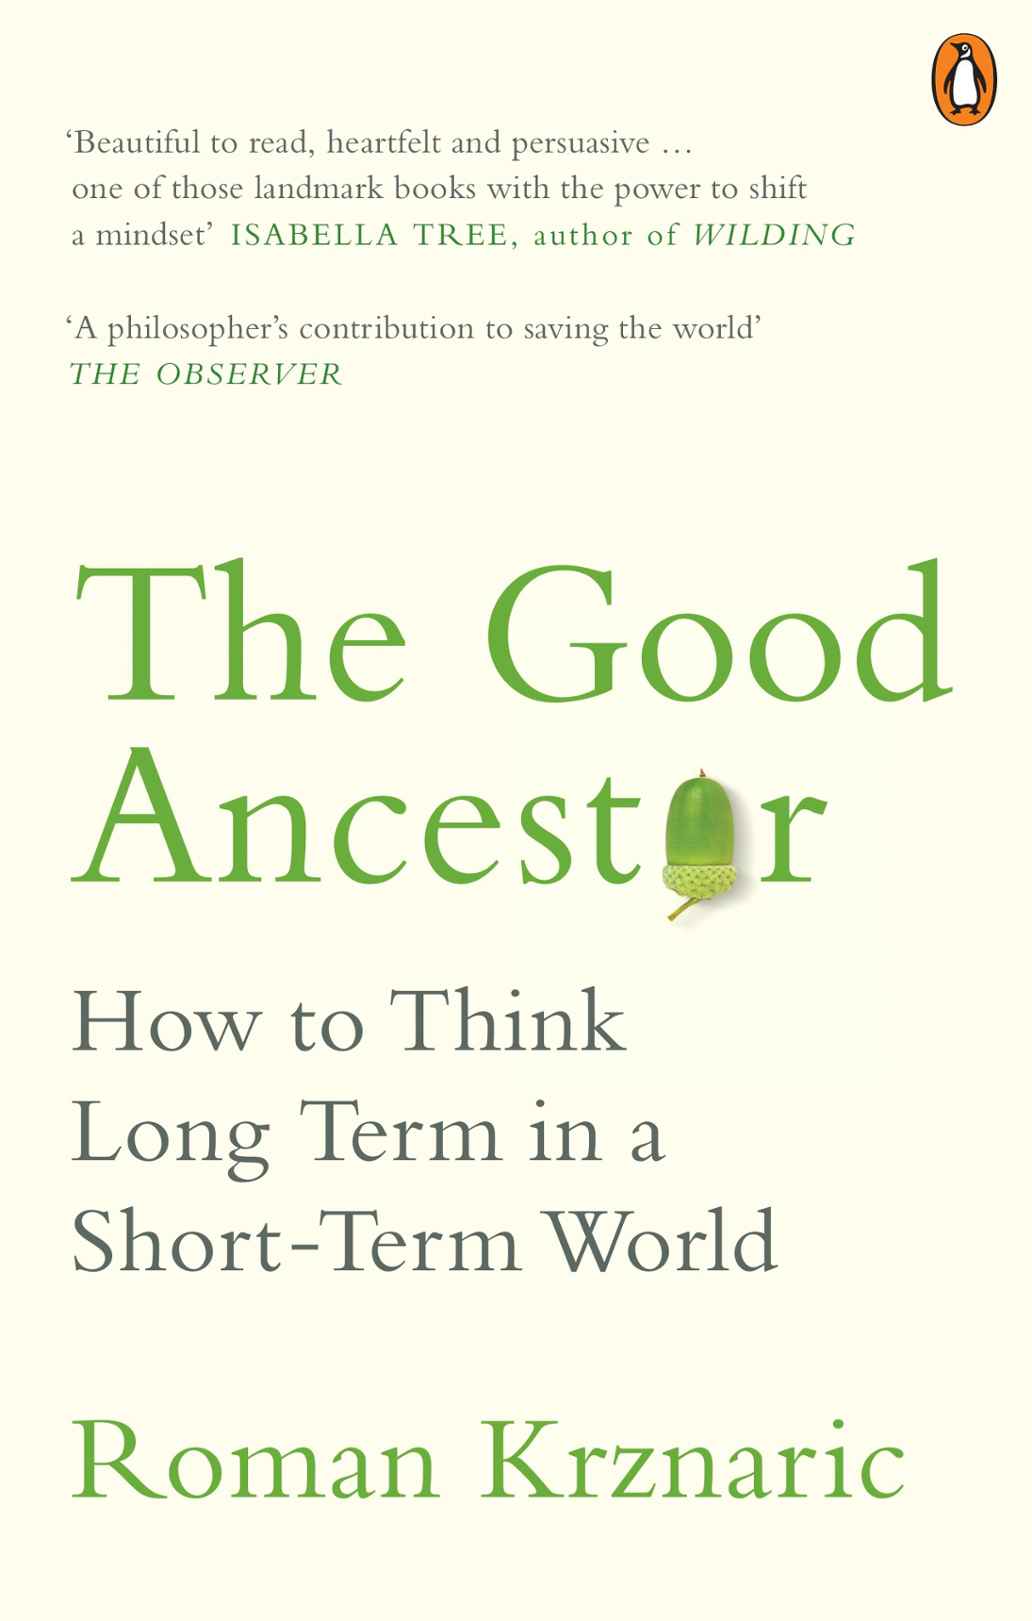 Front cover image of The Good Ancestor book